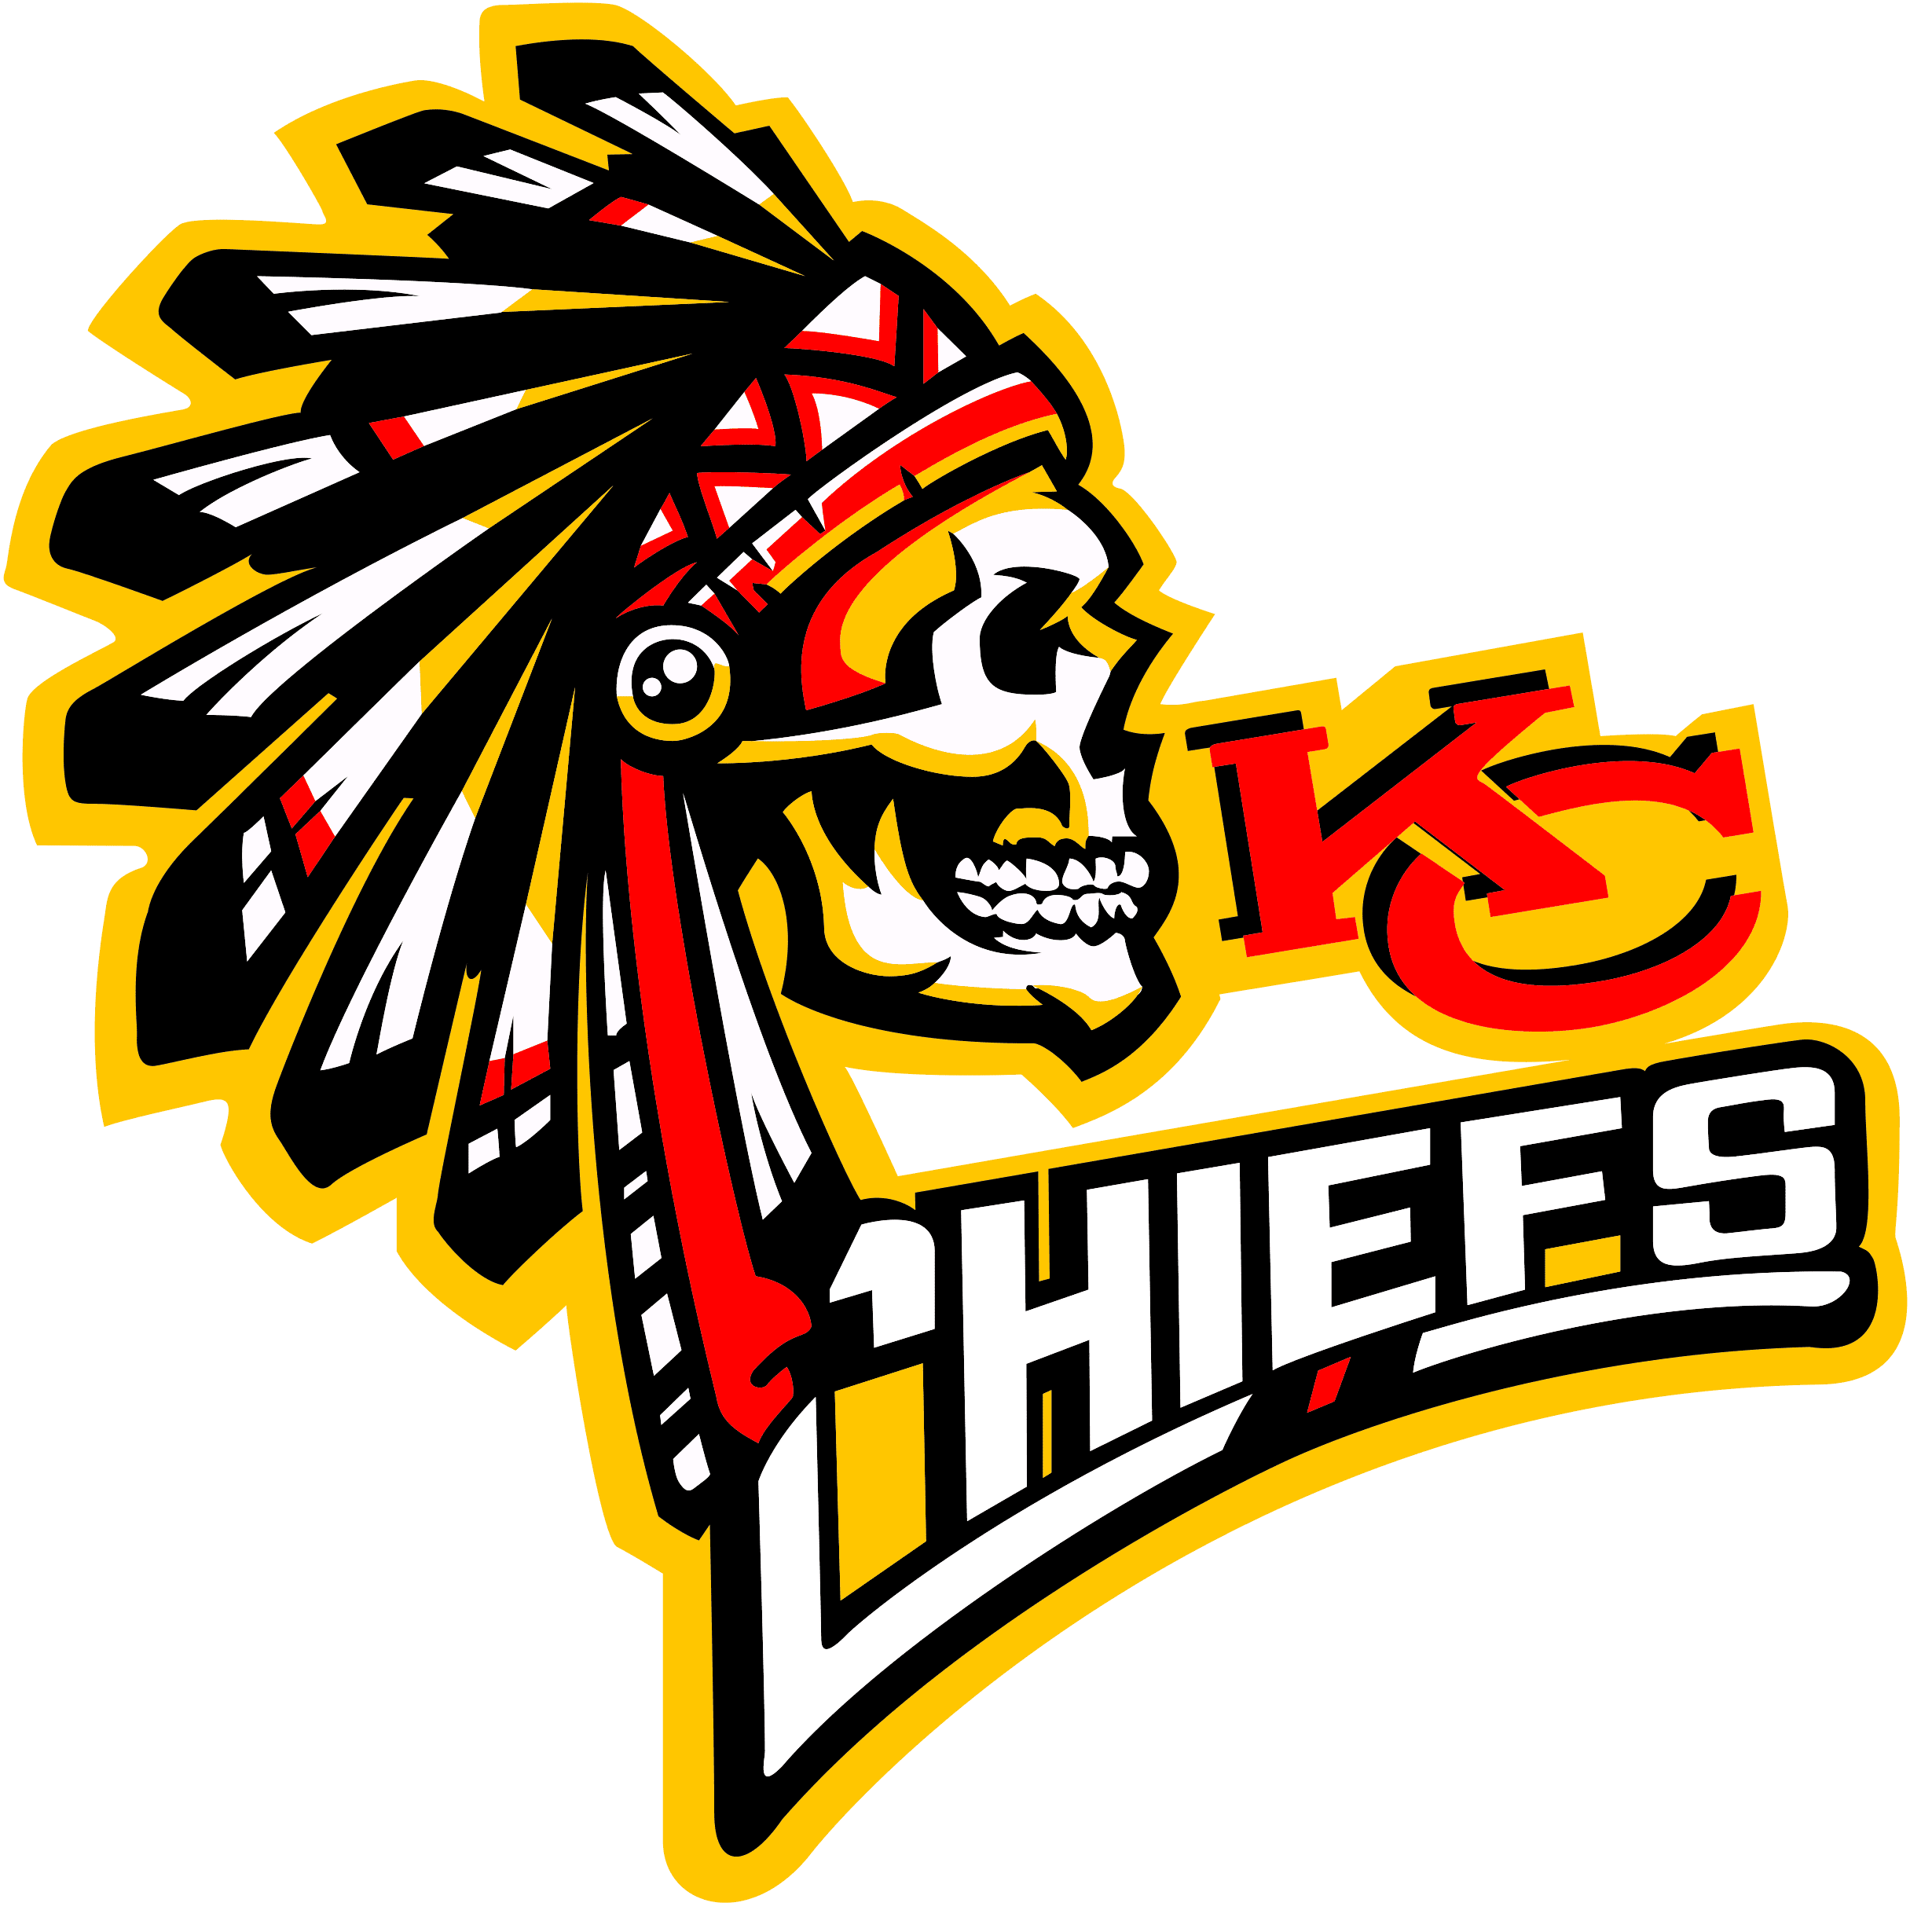 Love My kansas city chiefs svg,dxf,eps,png file